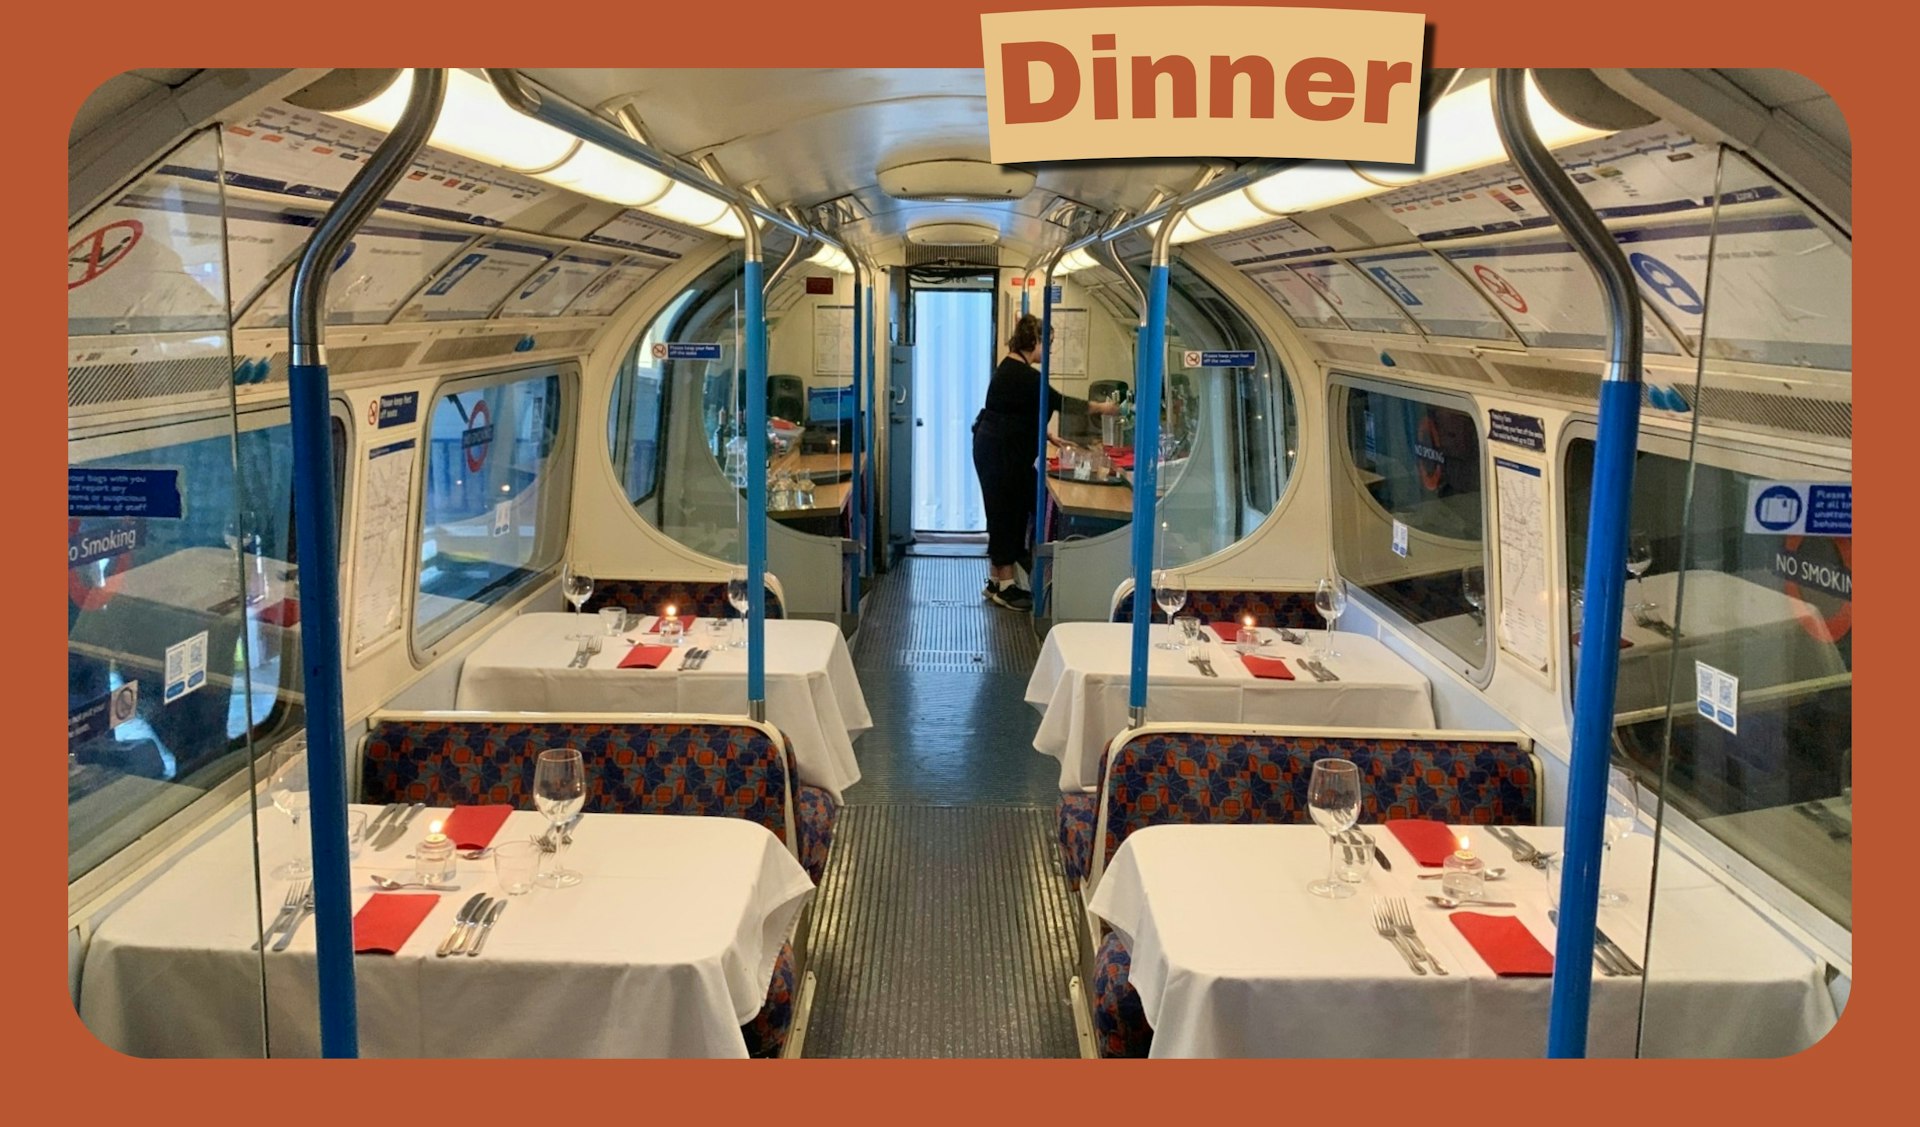 A disused London Tube is now a restaurant